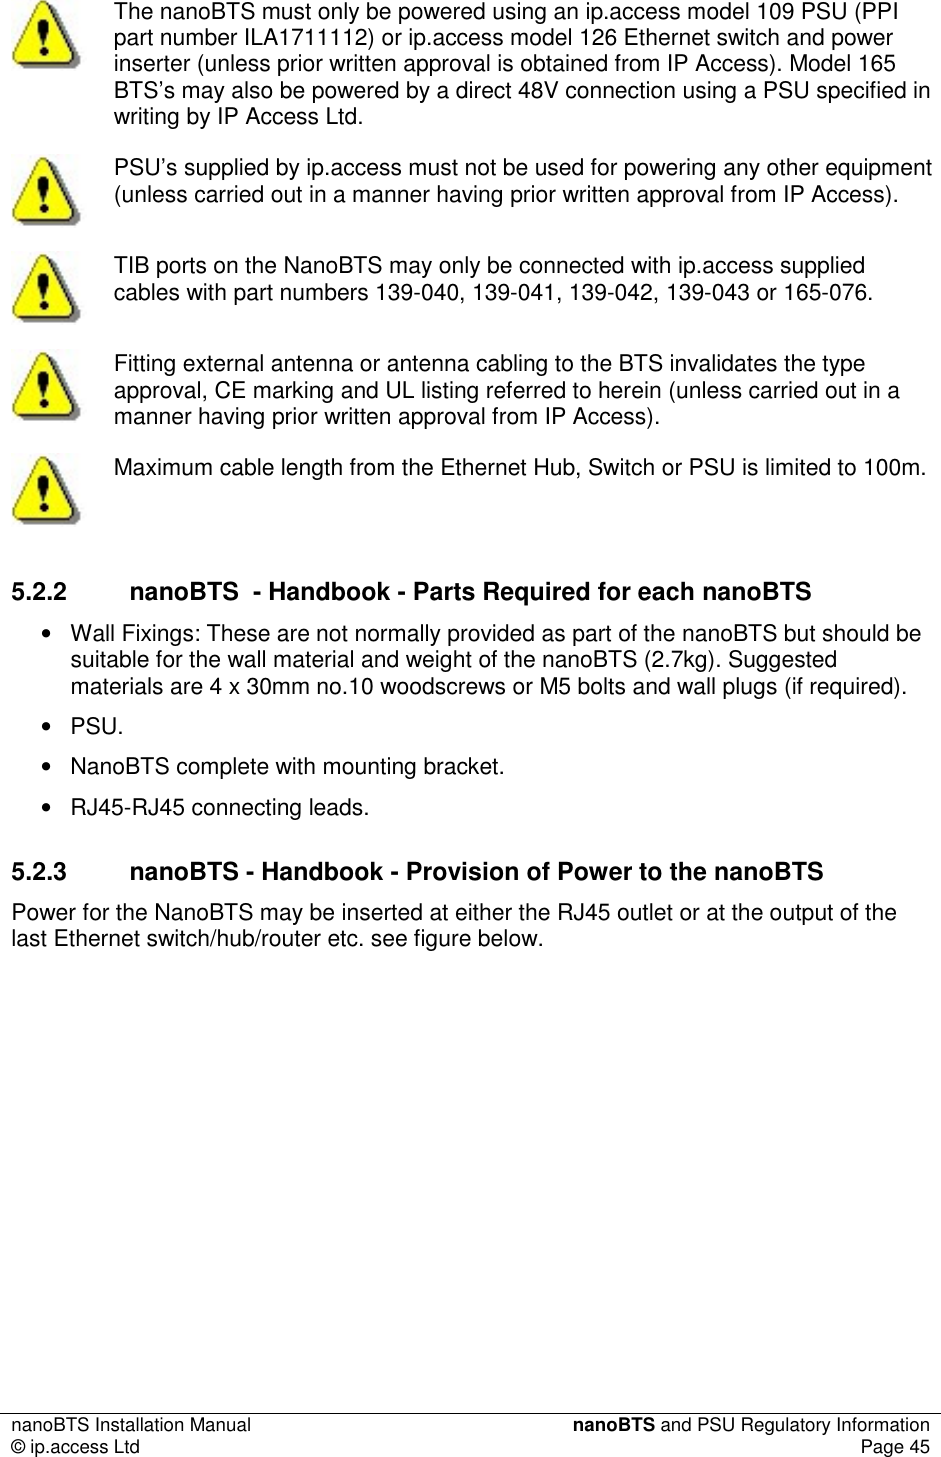 nanoBTS Installation Manual  nanoBTS and PSU Regulatory Information © ip.access Ltd  Page 45   The nanoBTS must only be powered using an ip.access model 109 PSU (PPI part number ILA1711112) or ip.access model 126 Ethernet switch and power inserter (unless prior written approval is obtained from IP Access). Model 165 BTS’s may also be powered by a direct 48V connection using a PSU specified in writing by IP Access Ltd.  PSU’s supplied by ip.access must not be used for powering any other equipment (unless carried out in a manner having prior written approval from IP Access).  TIB ports on the NanoBTS may only be connected with ip.access supplied cables with part numbers 139-040, 139-041, 139-042, 139-043 or 165-076.  Fitting external antenna or antenna cabling to the BTS invalidates the type approval, CE marking and UL listing referred to herein (unless carried out in a manner having prior written approval from IP Access).  Maximum cable length from the Ethernet Hub, Switch or PSU is limited to 100m. 5.2.2  nanoBTS  - Handbook - Parts Required for each nanoBTS •  Wall Fixings: These are not normally provided as part of the nanoBTS but should be suitable for the wall material and weight of the nanoBTS (2.7kg). Suggested materials are 4 x 30mm no.10 woodscrews or M5 bolts and wall plugs (if required). •  PSU. •  NanoBTS complete with mounting bracket. •  RJ45-RJ45 connecting leads. 5.2.3  nanoBTS - Handbook - Provision of Power to the nanoBTS Power for the NanoBTS may be inserted at either the RJ45 outlet or at the output of the last Ethernet switch/hub/router etc. see figure below. 